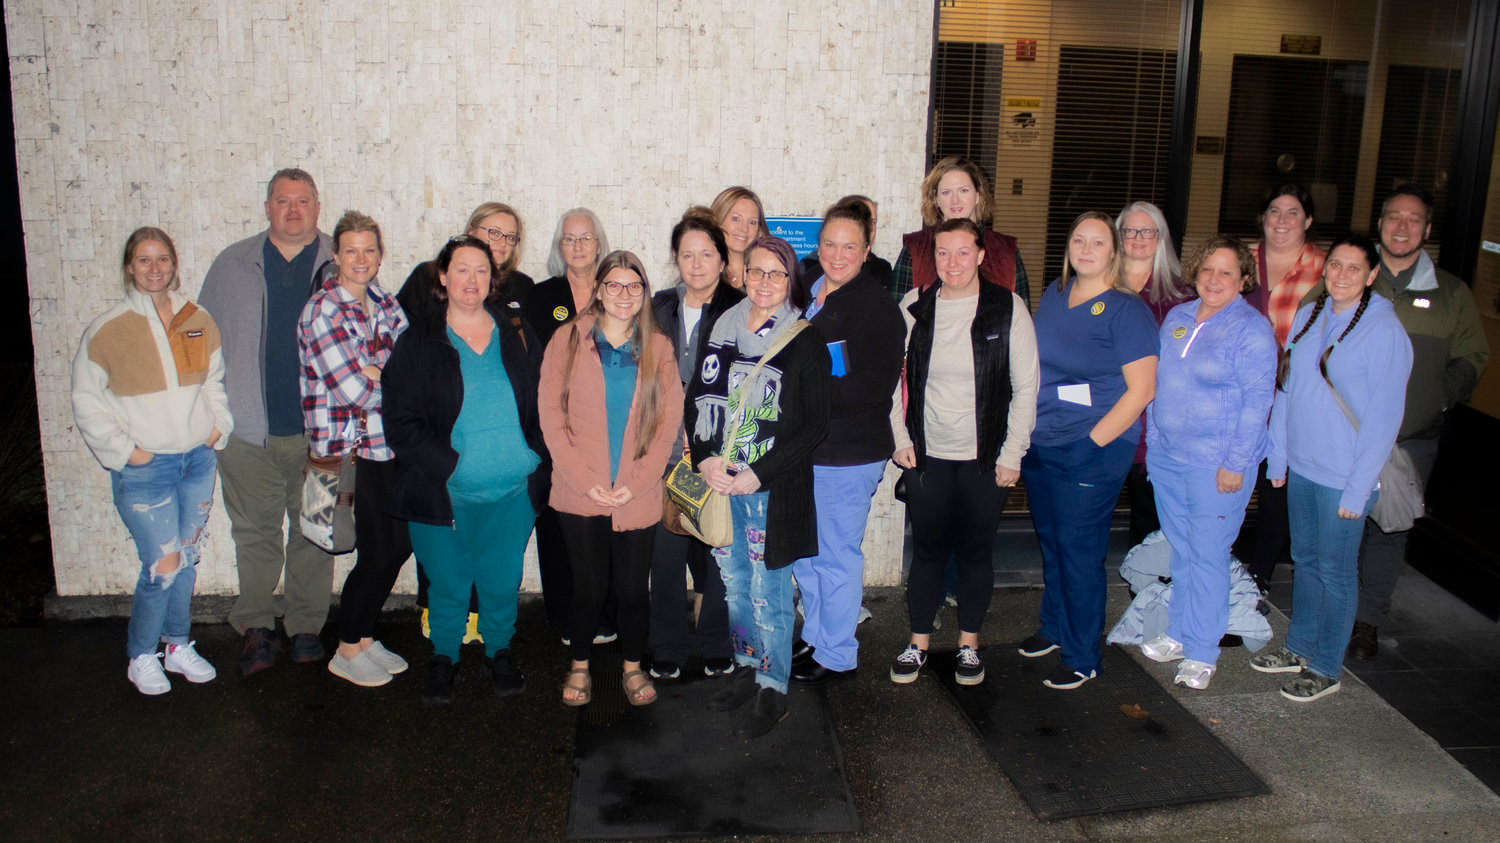 A group of nurses from Providence Centralia Hospital pose outside Chehalis City Hall after some of them spoke during the public comment period of the Chehalis City Council’s regular meeting on Monday night. The nurses asked the council for support for better staffing and addressing safety concerns.